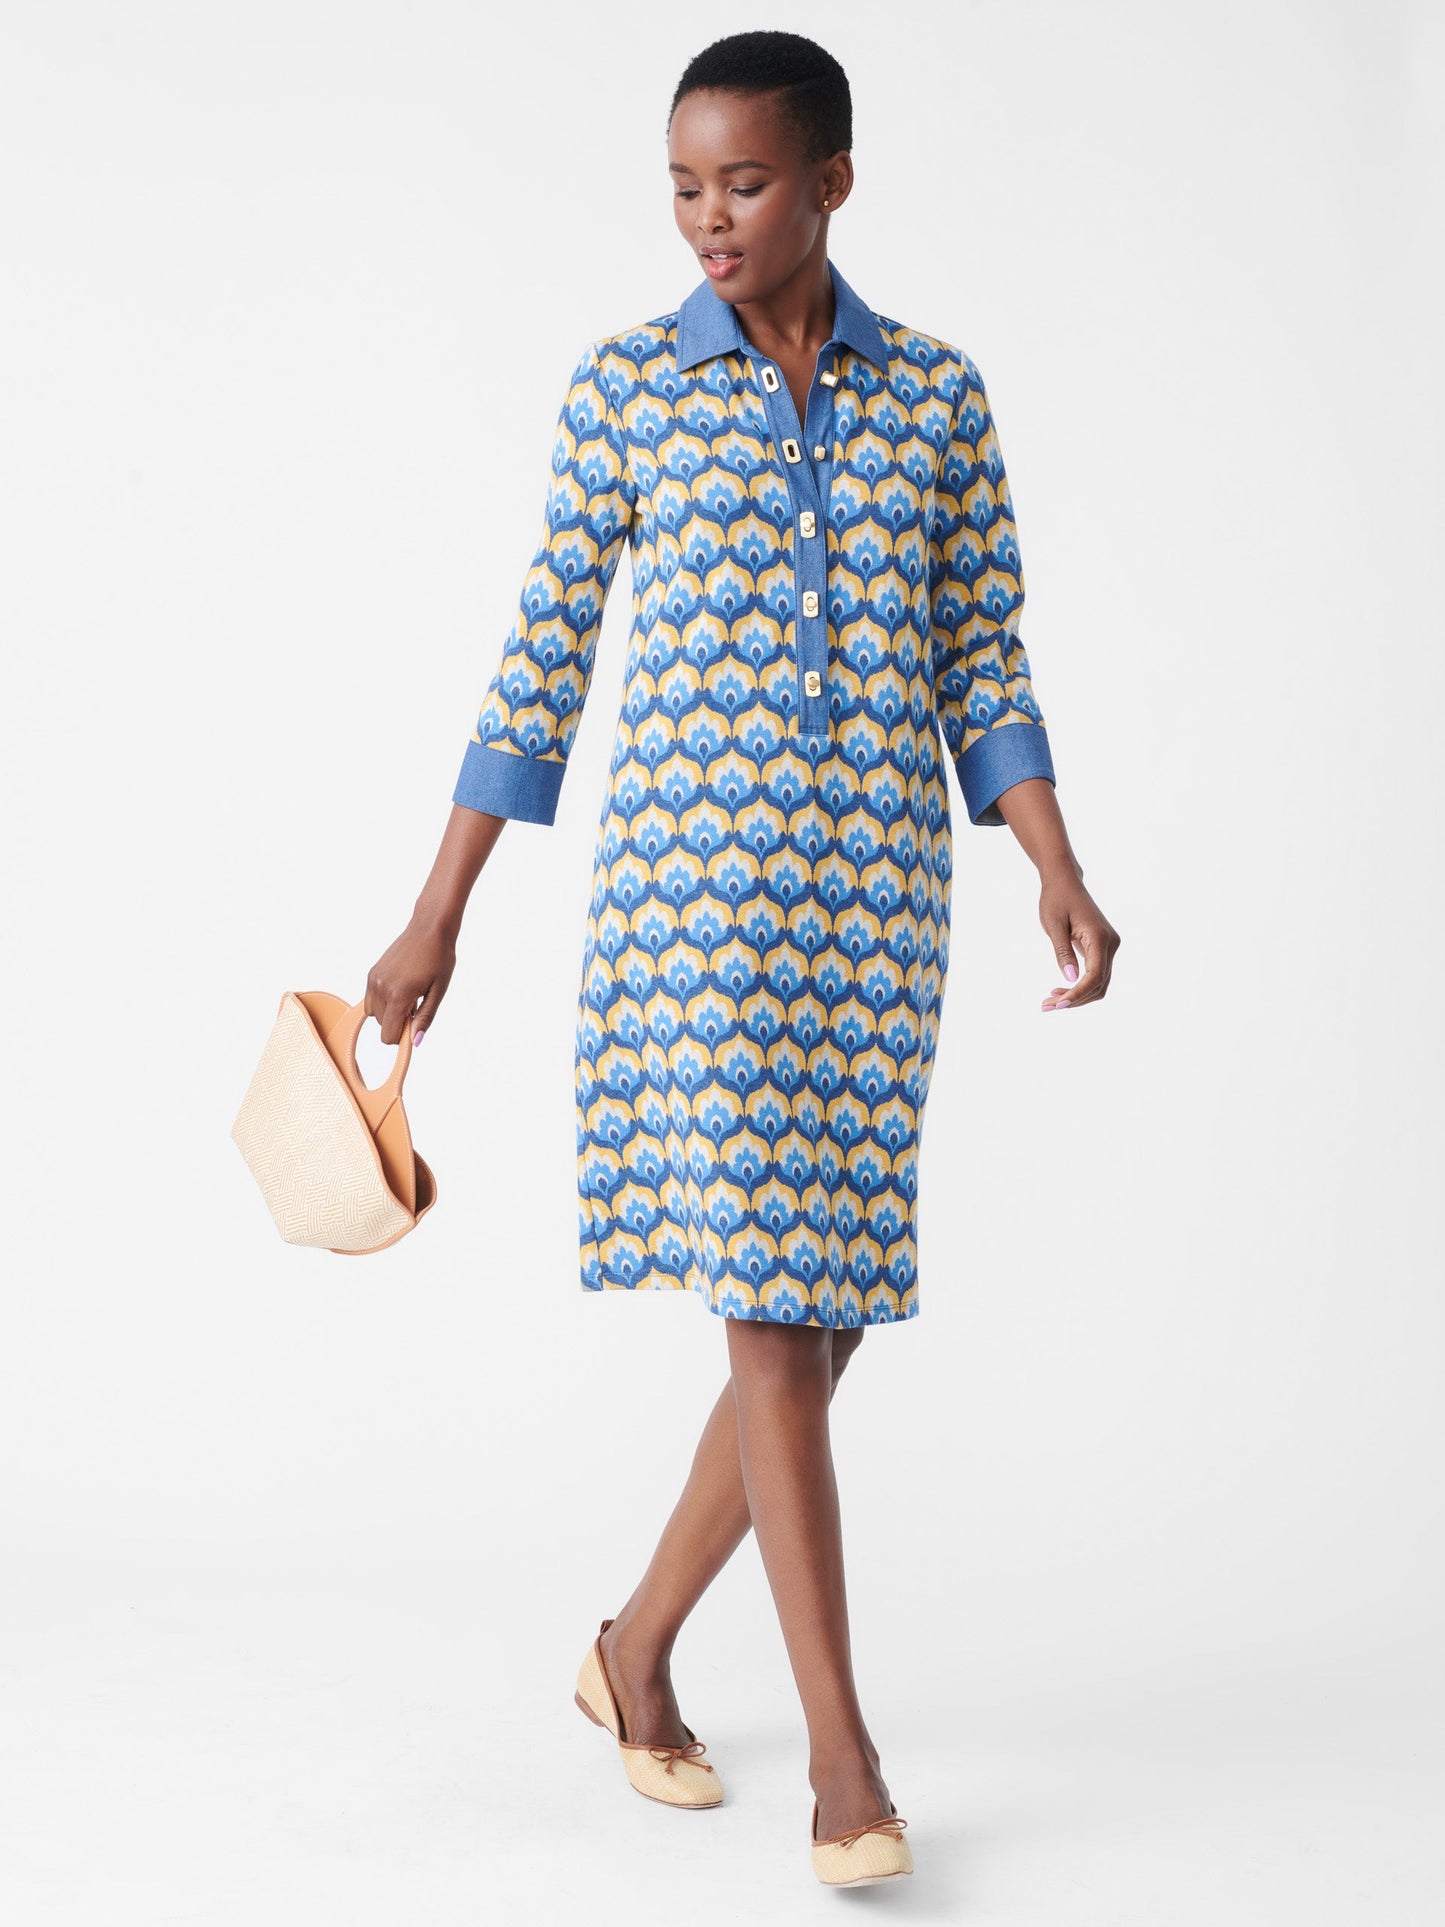 Model wearing J.McLaughlin Bryony dress in denim/gold made with cotton/polyester/elastane.